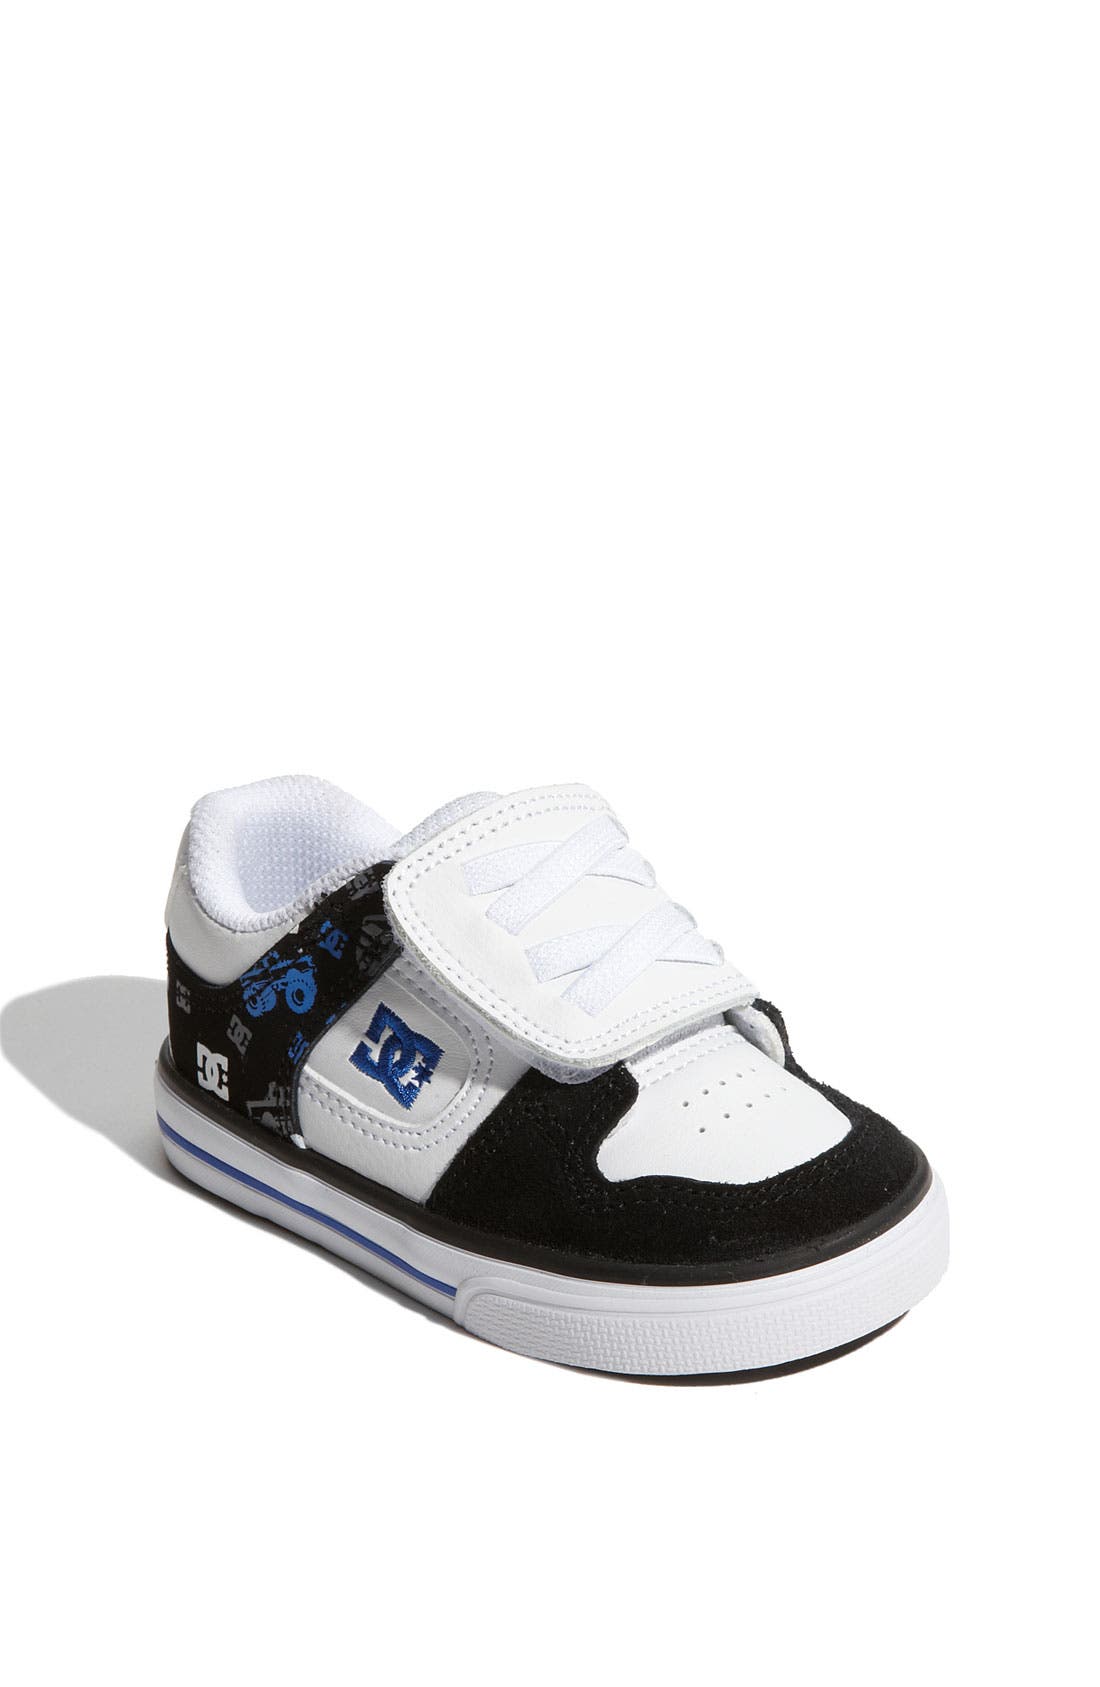 DC SHOES PURE VELCRO SNEAKER | Nordstrom